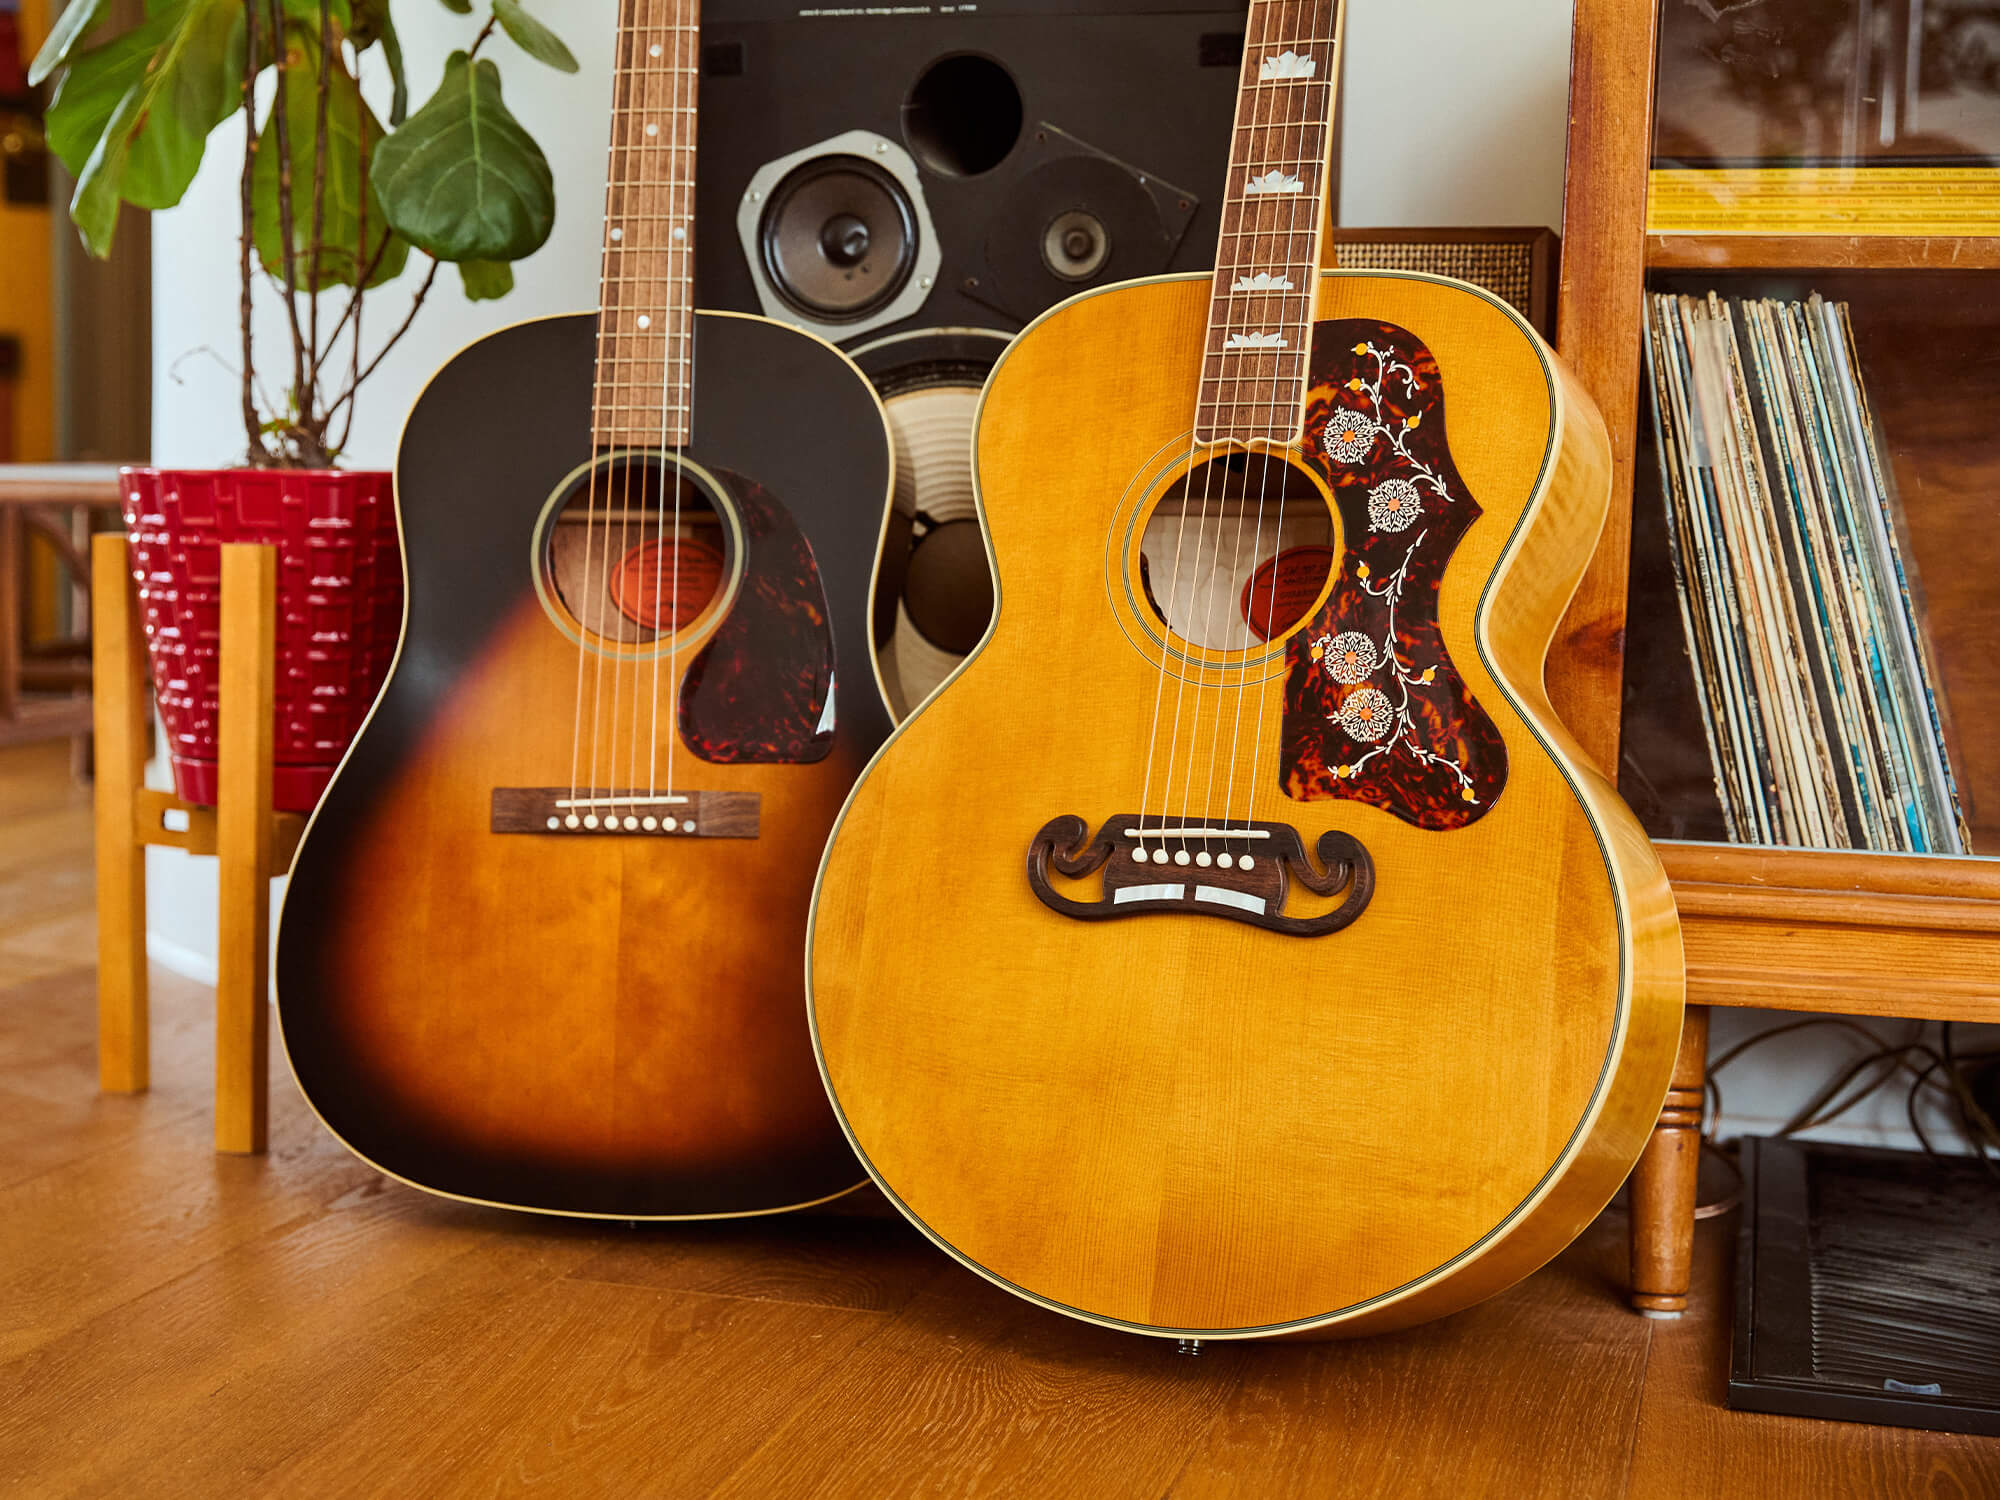 Inspired by Gibson acoustics - the 1942 Banner and the SJ-200 - photographed together.